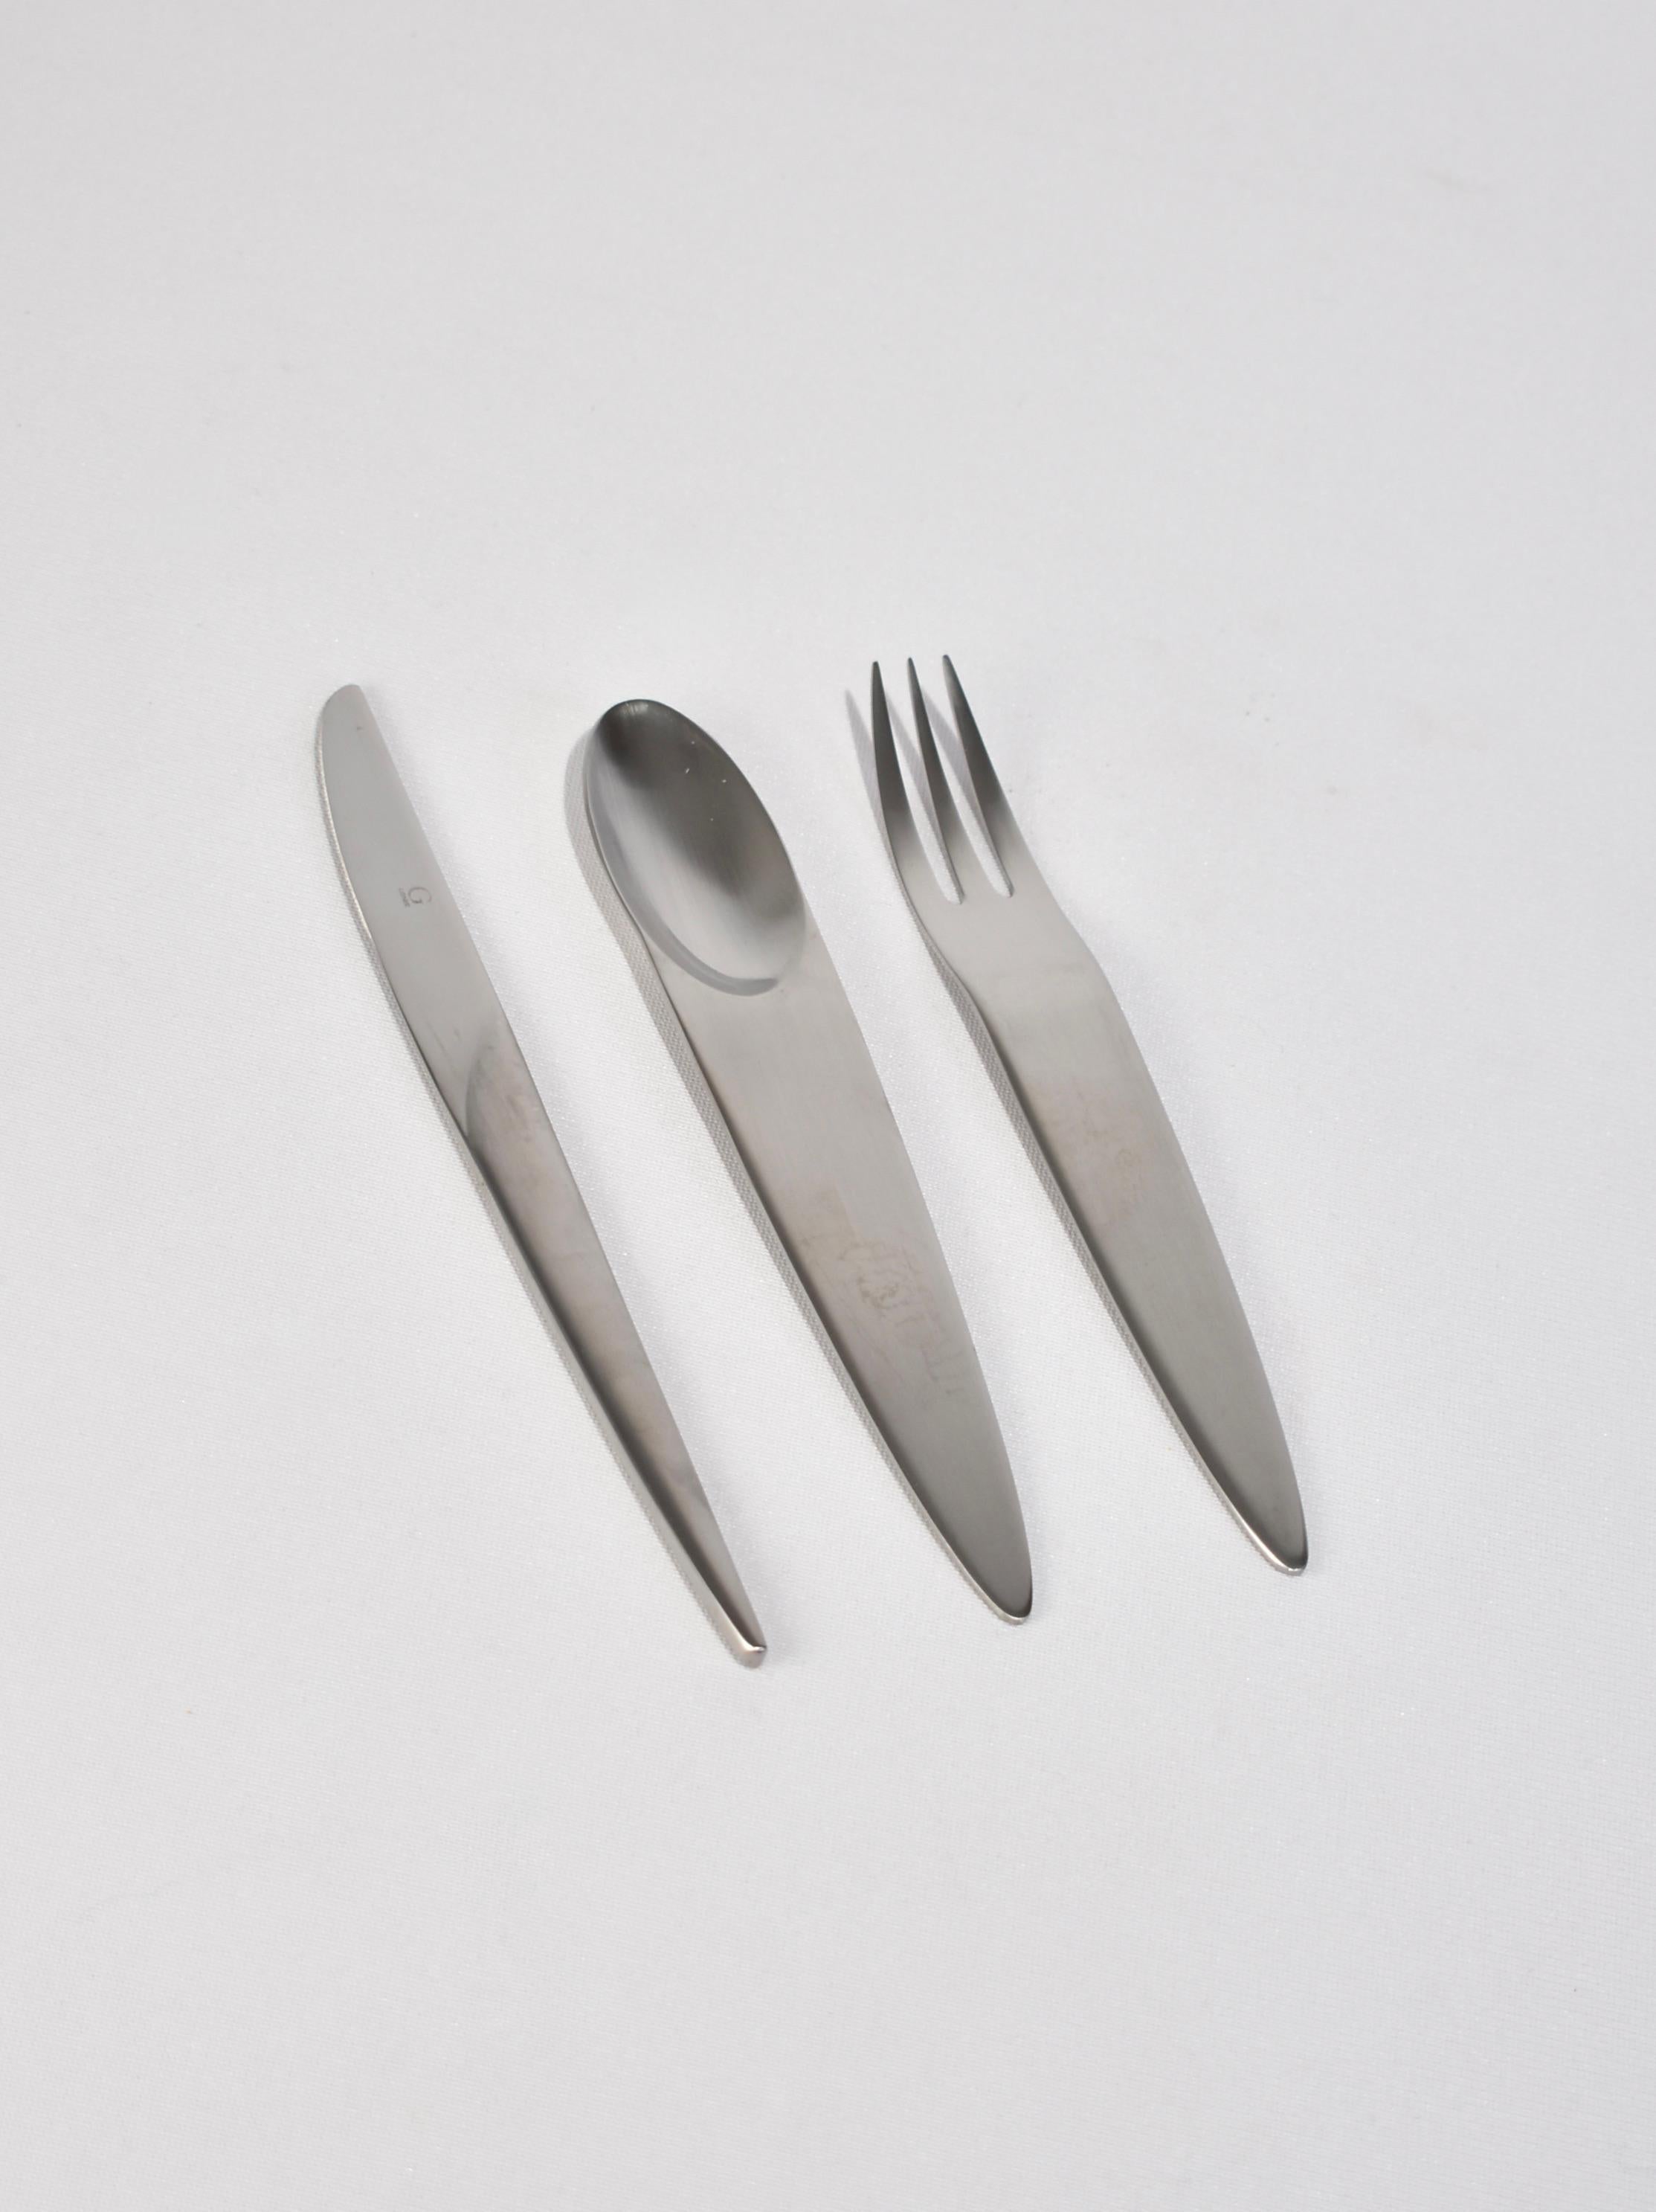 Rare stainless steel modernist flatware set of three by Gense. Crafted in Sweden.

Purchase includes one set of three pieces. Multiple sets available.

Dimensions:
Knife: 8 in (20.32 cm) long
Spoon: 7.5 in (19.05 cm) long
Fork: 7.5 in (19.05 cm)